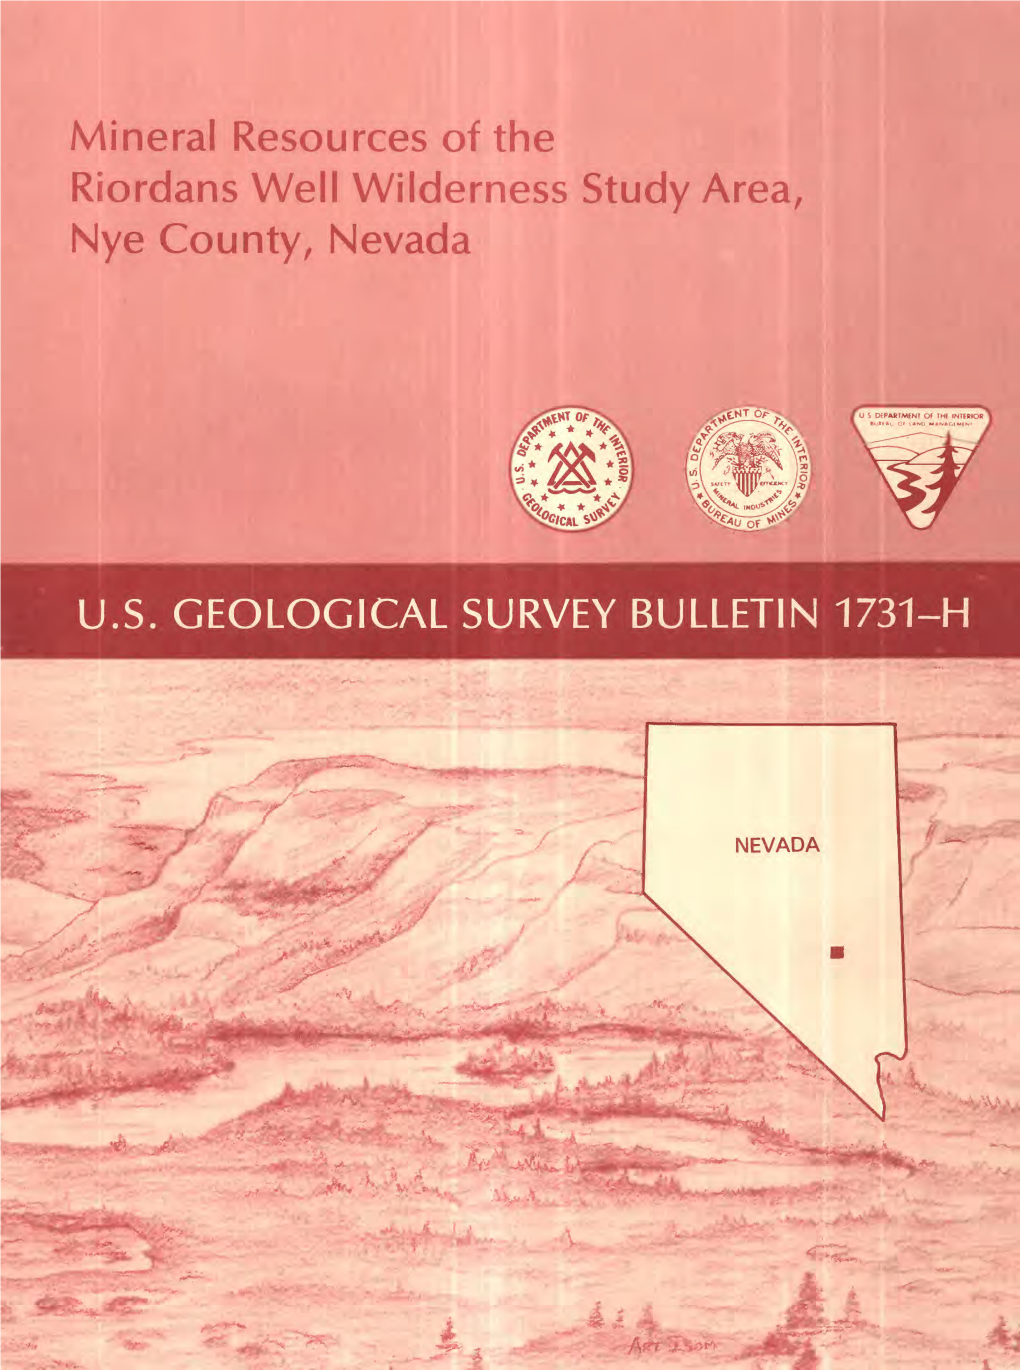 Mineral Resources of the Riordans Well Wilderness Study Area, Nye County, Nevada